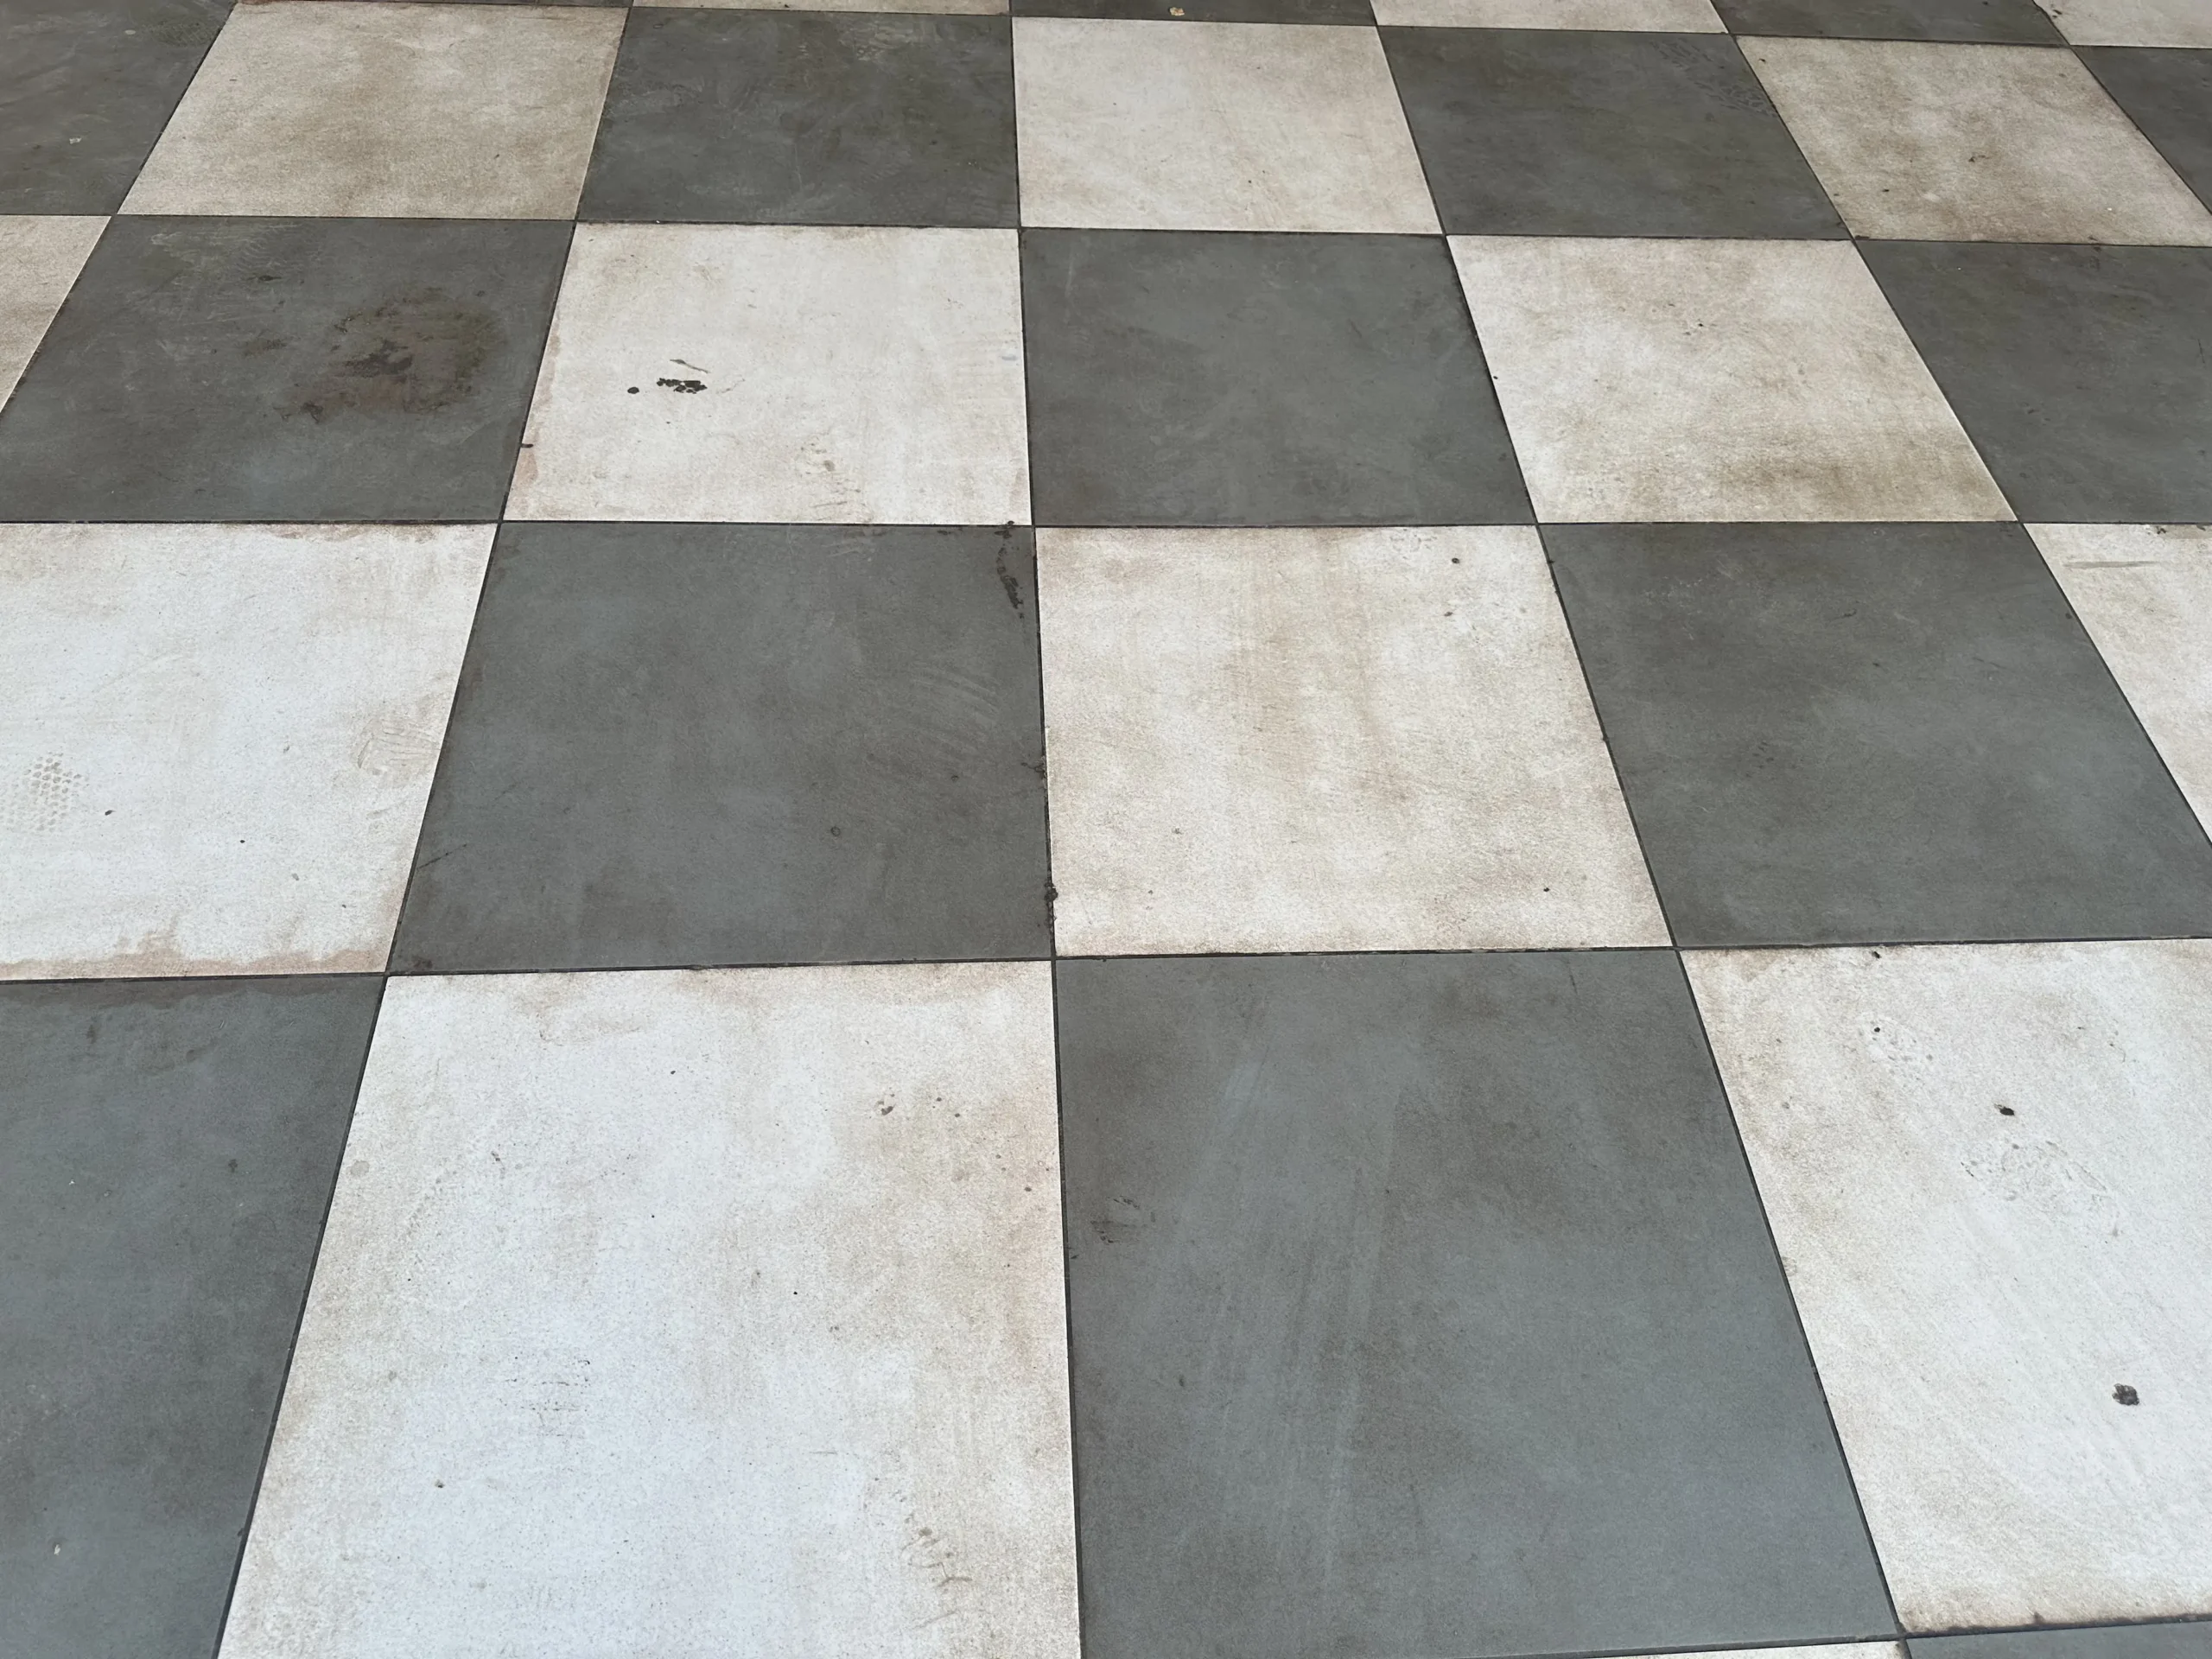 What are the disadvantages of vitrified floor tiles?